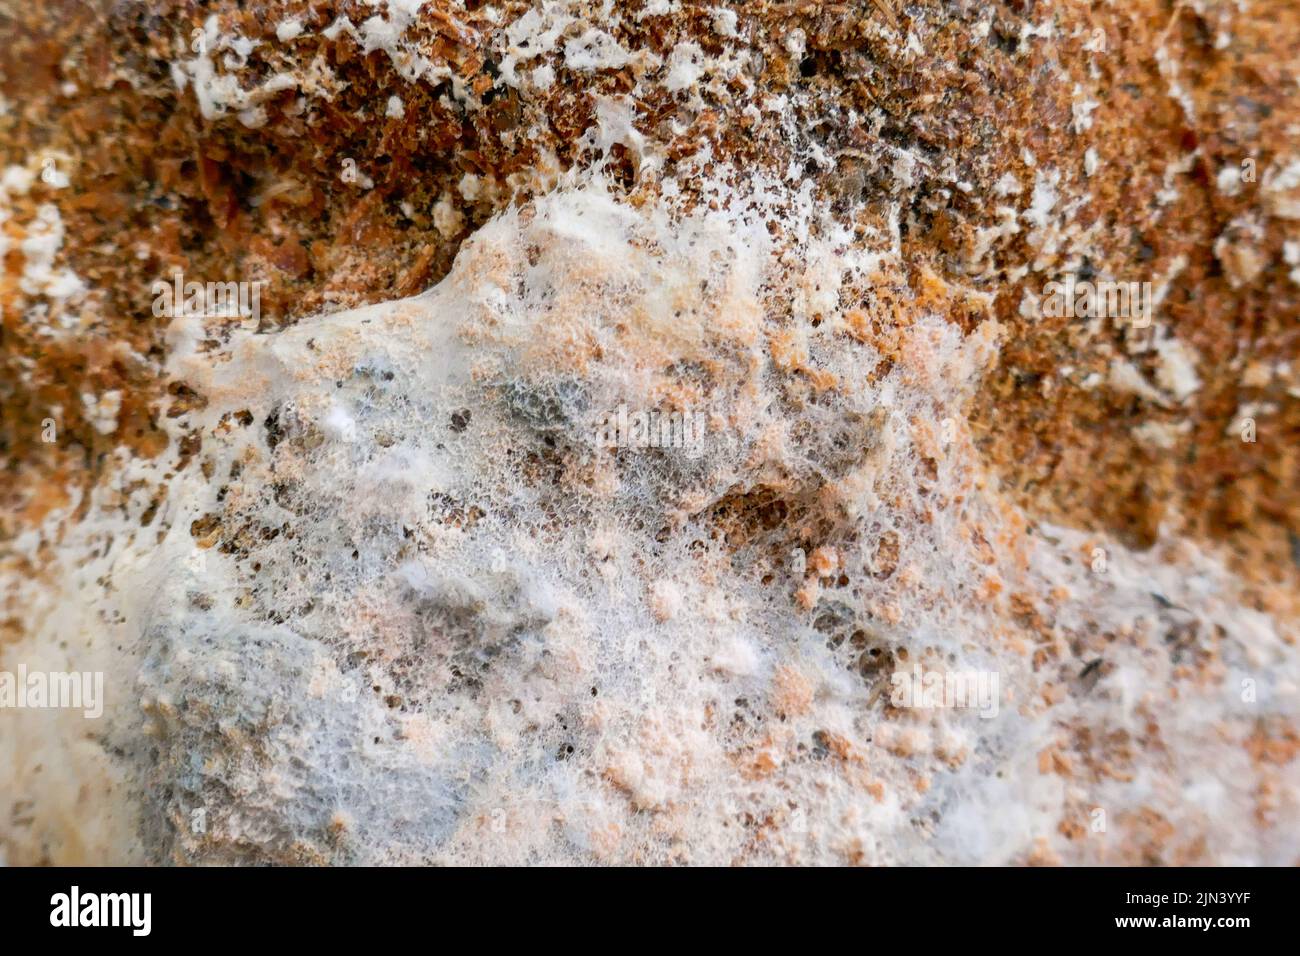 Mold texture. mold close-up. fungal diseases.Mold fungus wall surface. Mold and fungus problem Stock Photo